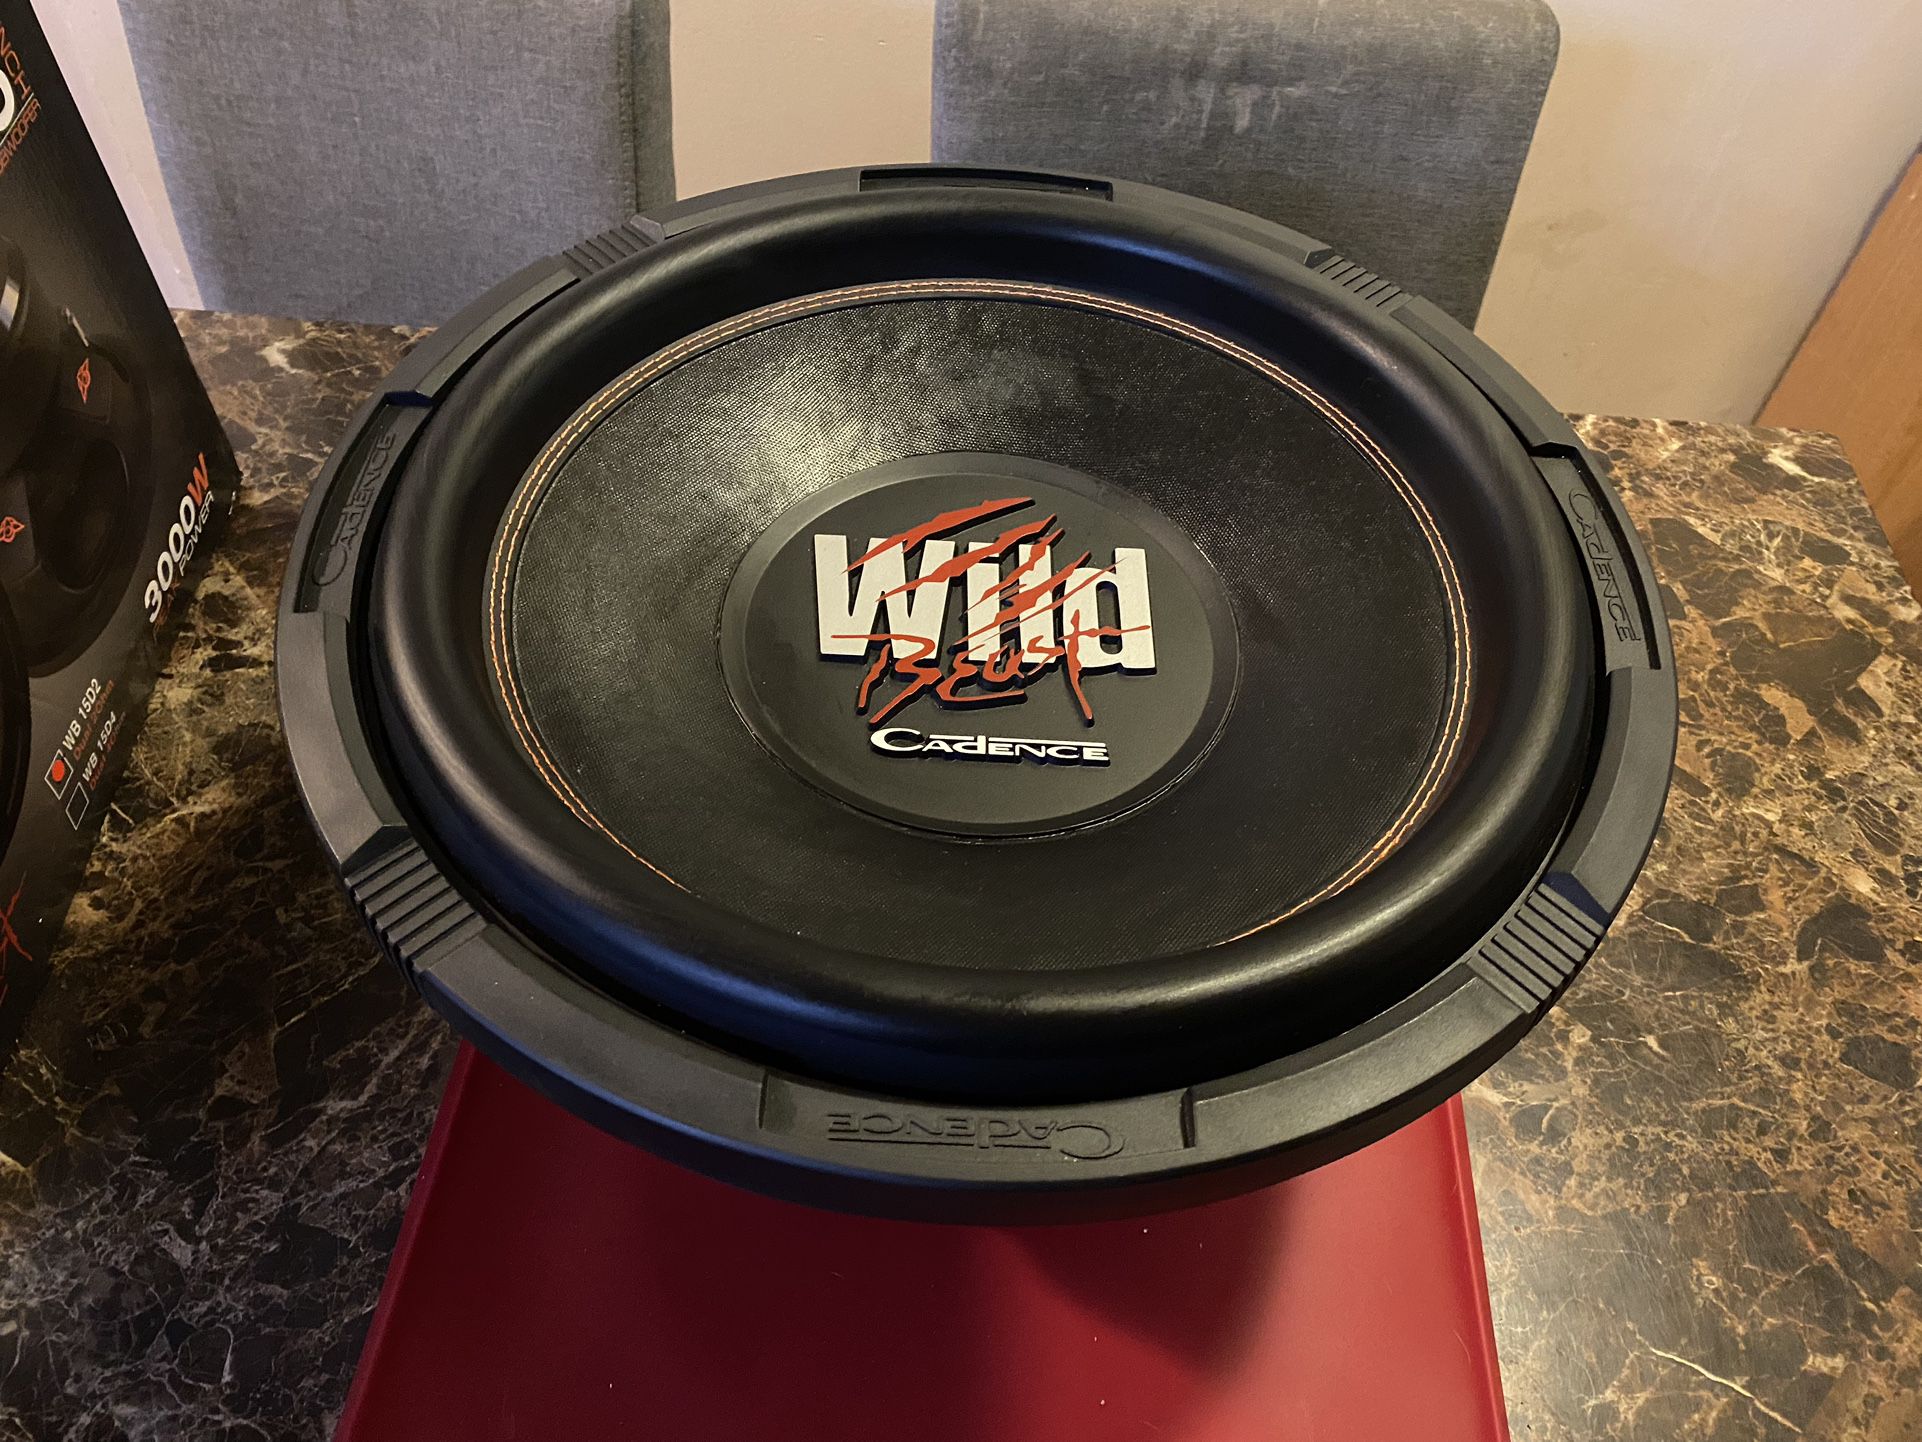 New 15" Cadence WB15  3000w Subwoofer  $300 - one available  